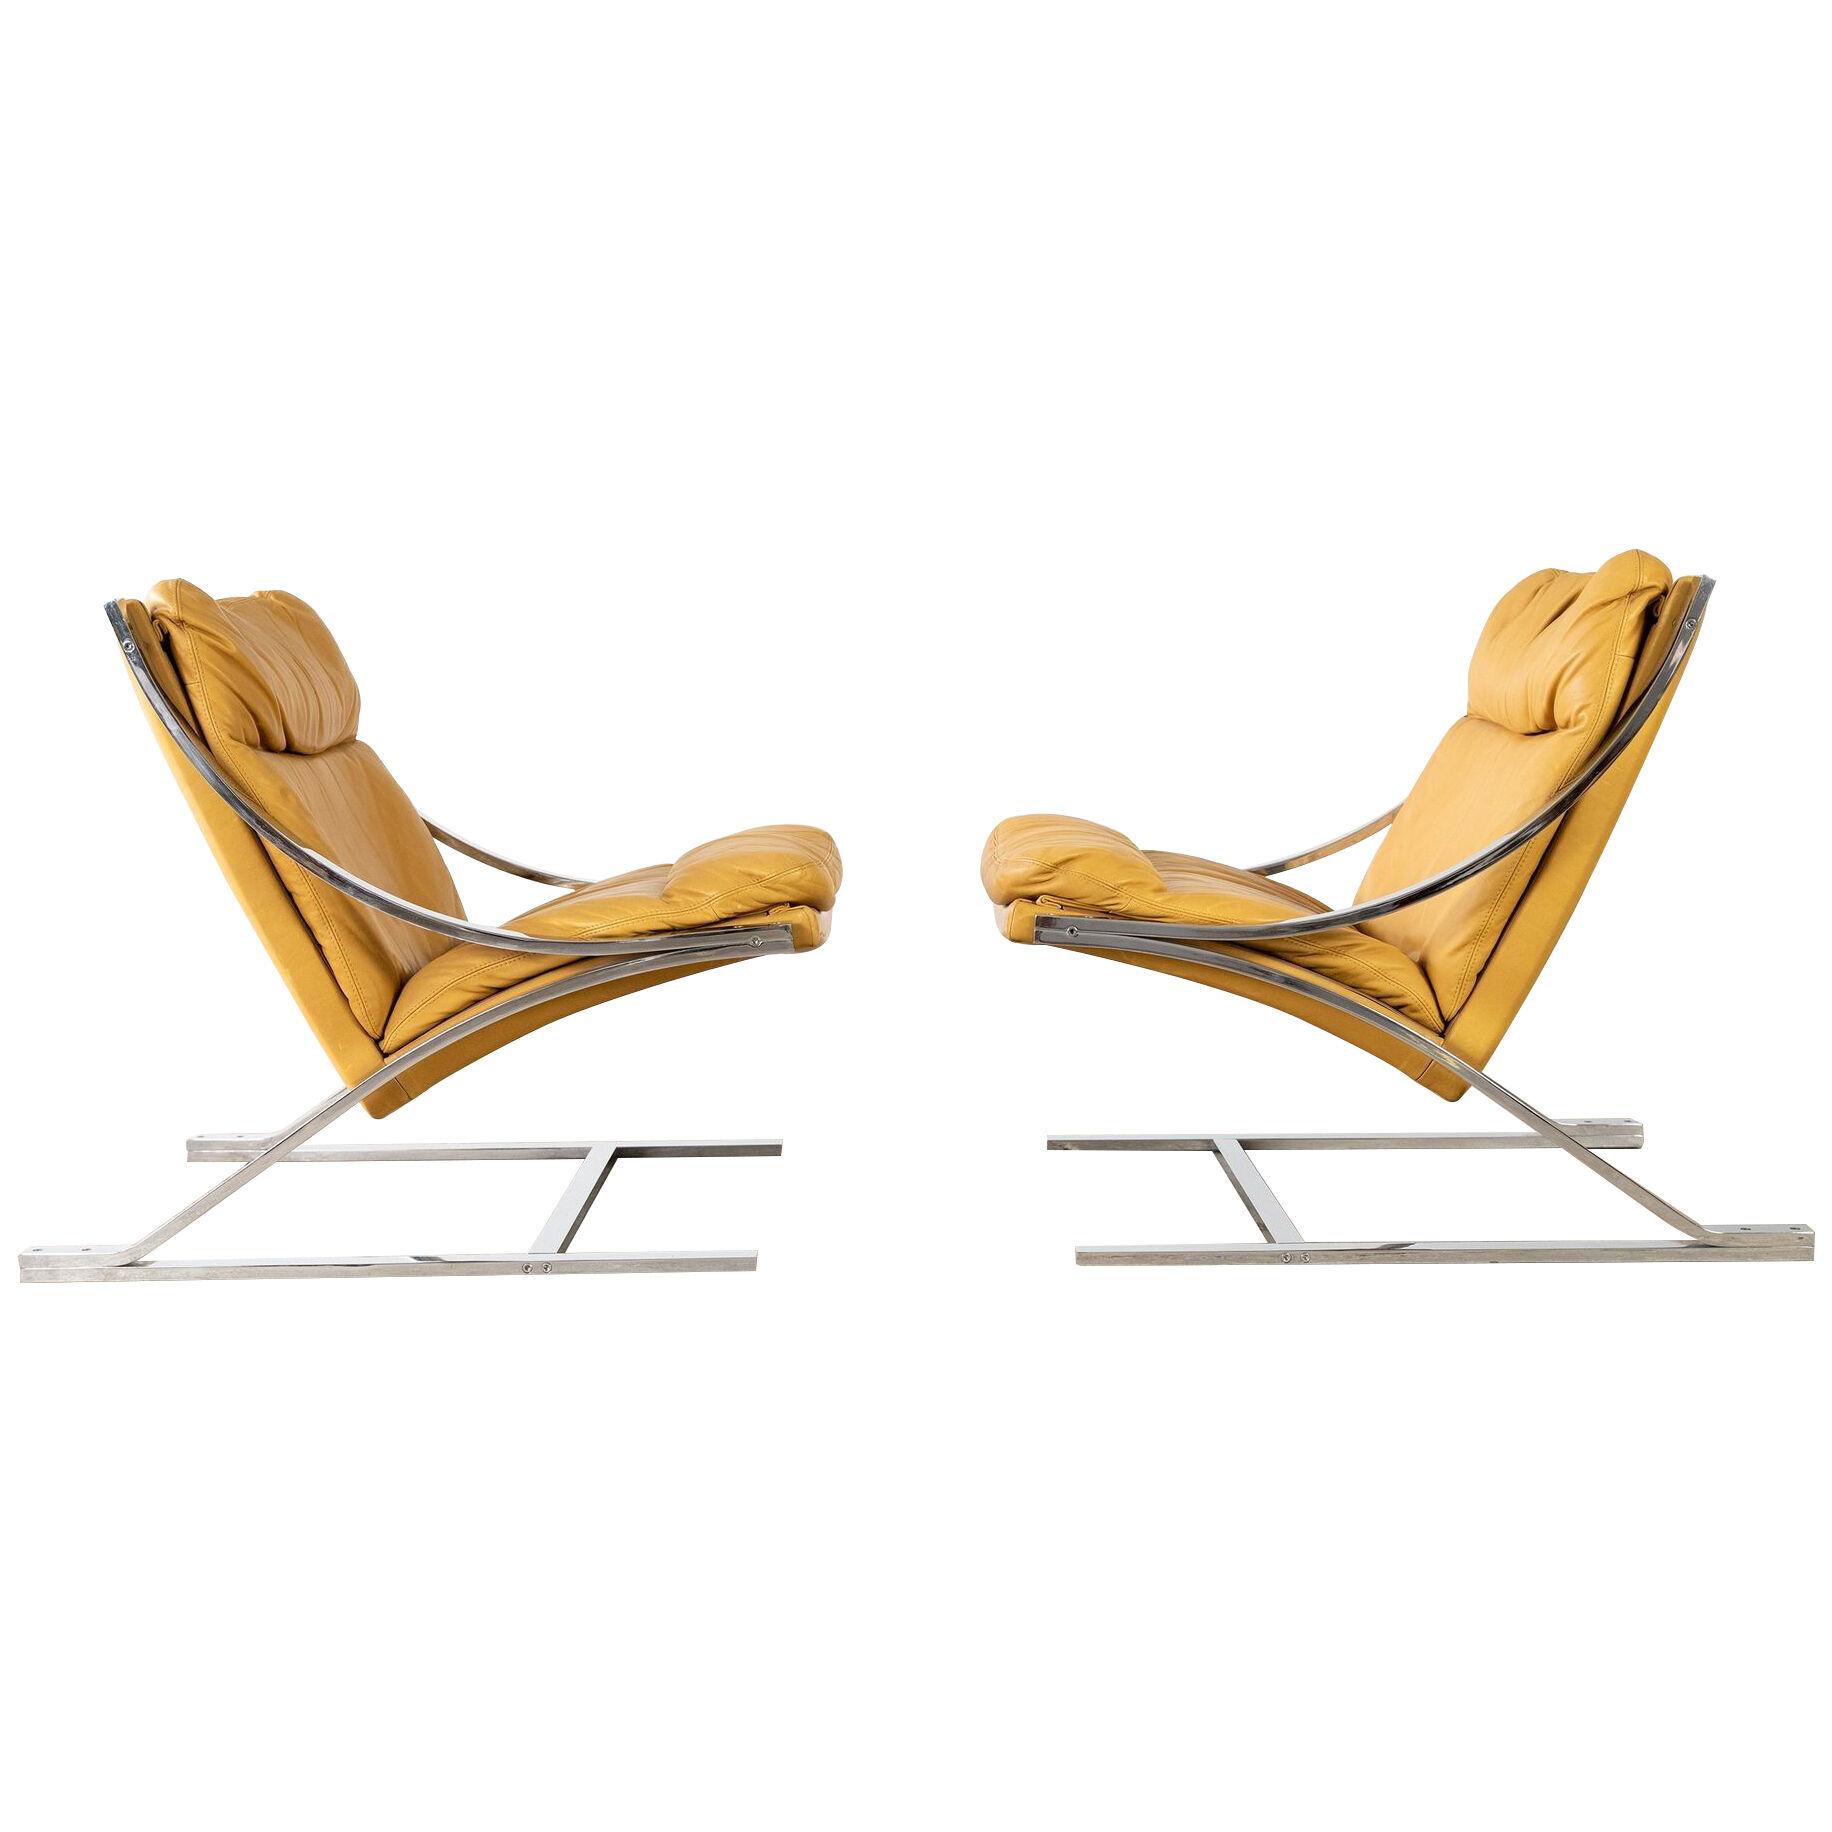 Paul Tuttle Zeta Chairs for Strassle International in Original Camel Leather